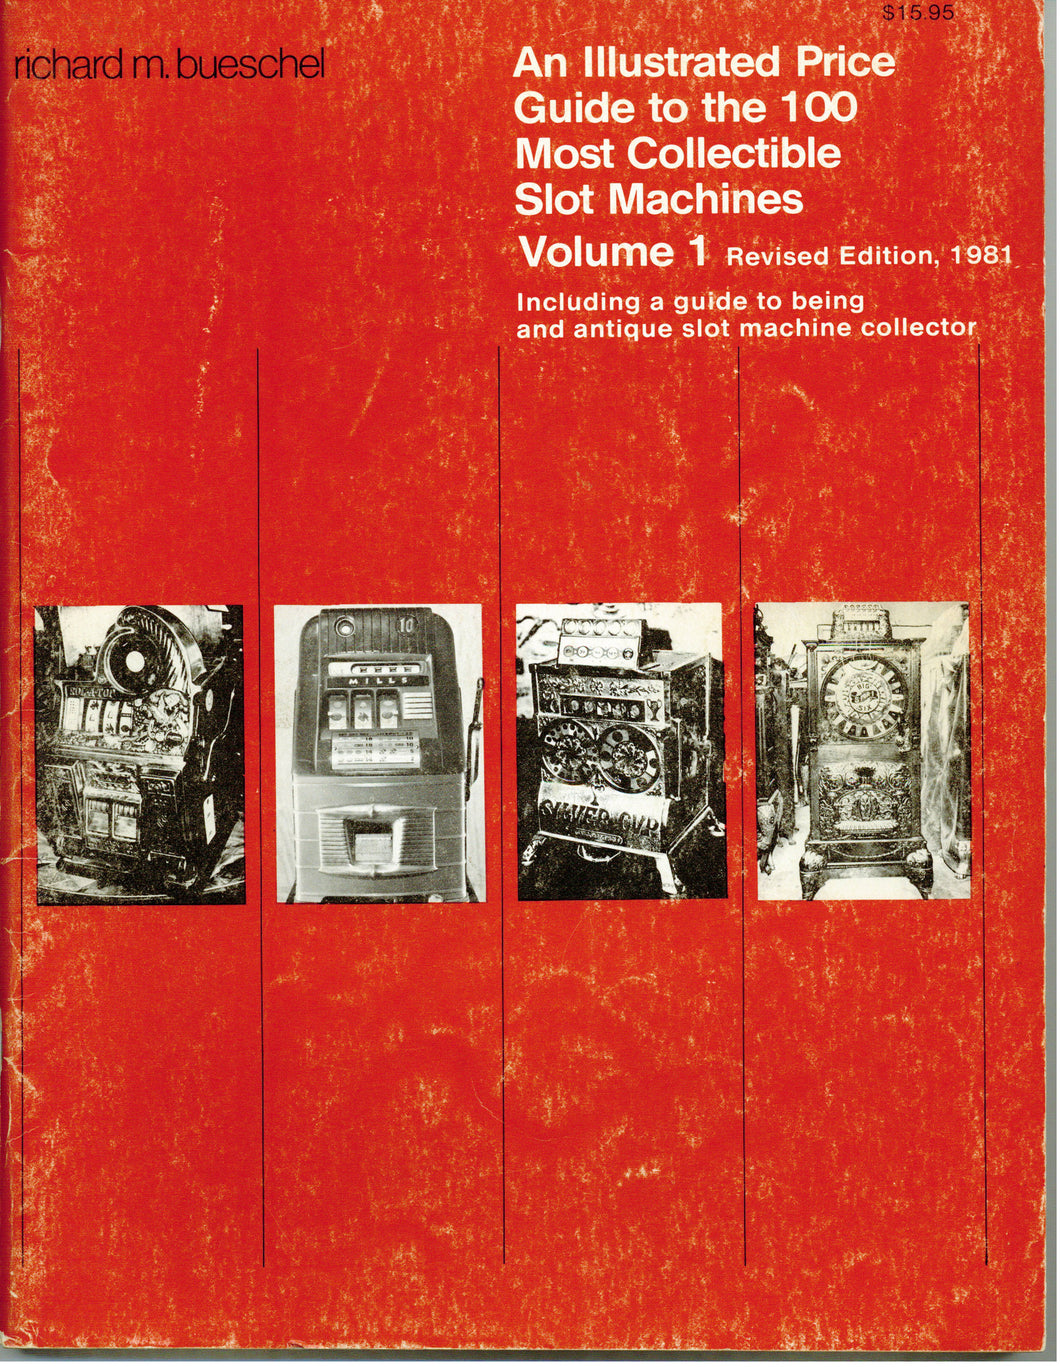 ZZ - Slots 1: Illustrated Price Guide to 100 Most Collectible Slot Machines, Volume 1 Revised